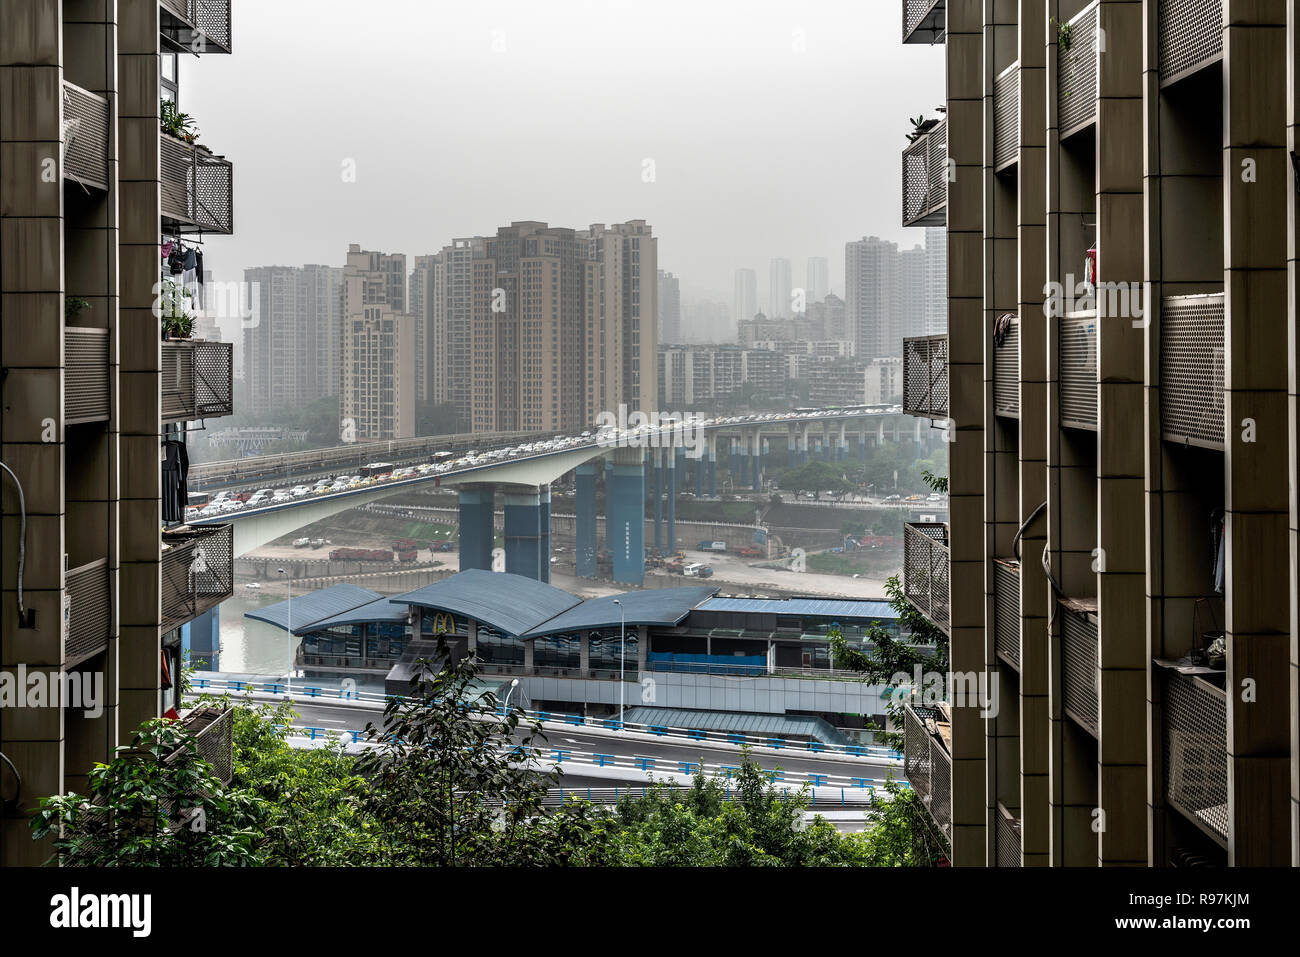 View of high rise city buildings on a foggy day in Chongqing, China Stock Photo